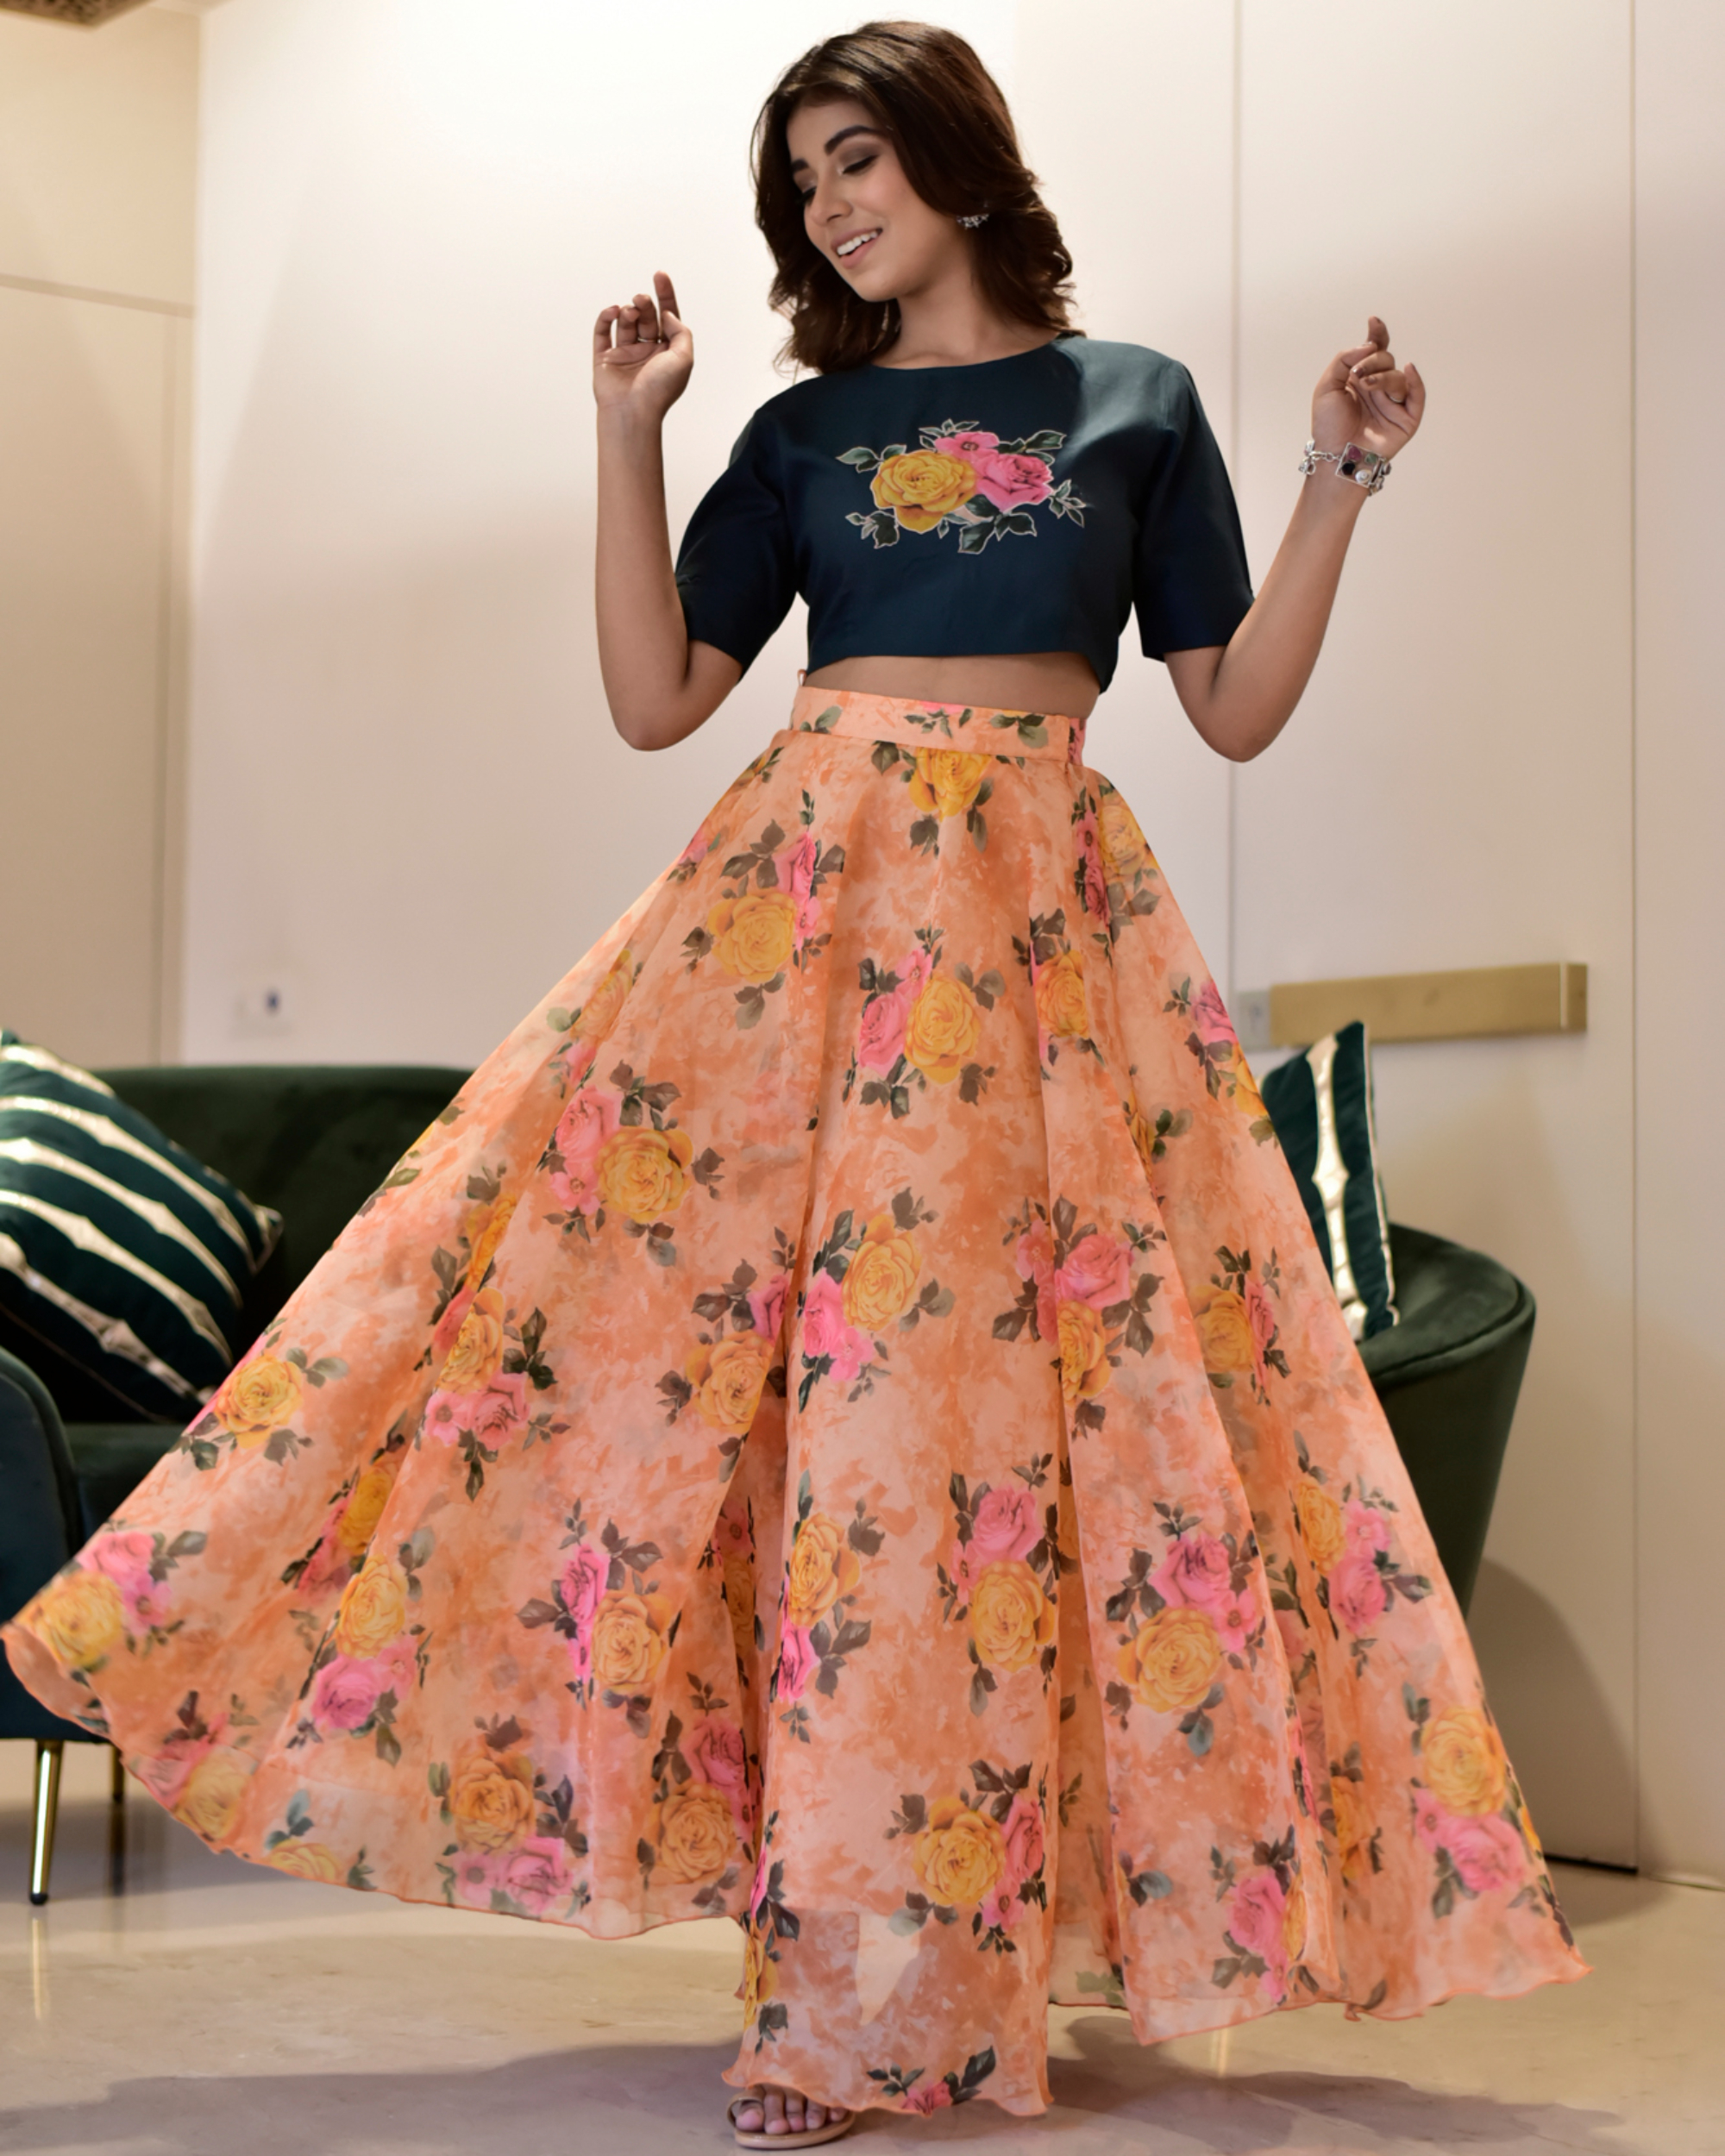 Green and orange rose garden top with skirt - set of two